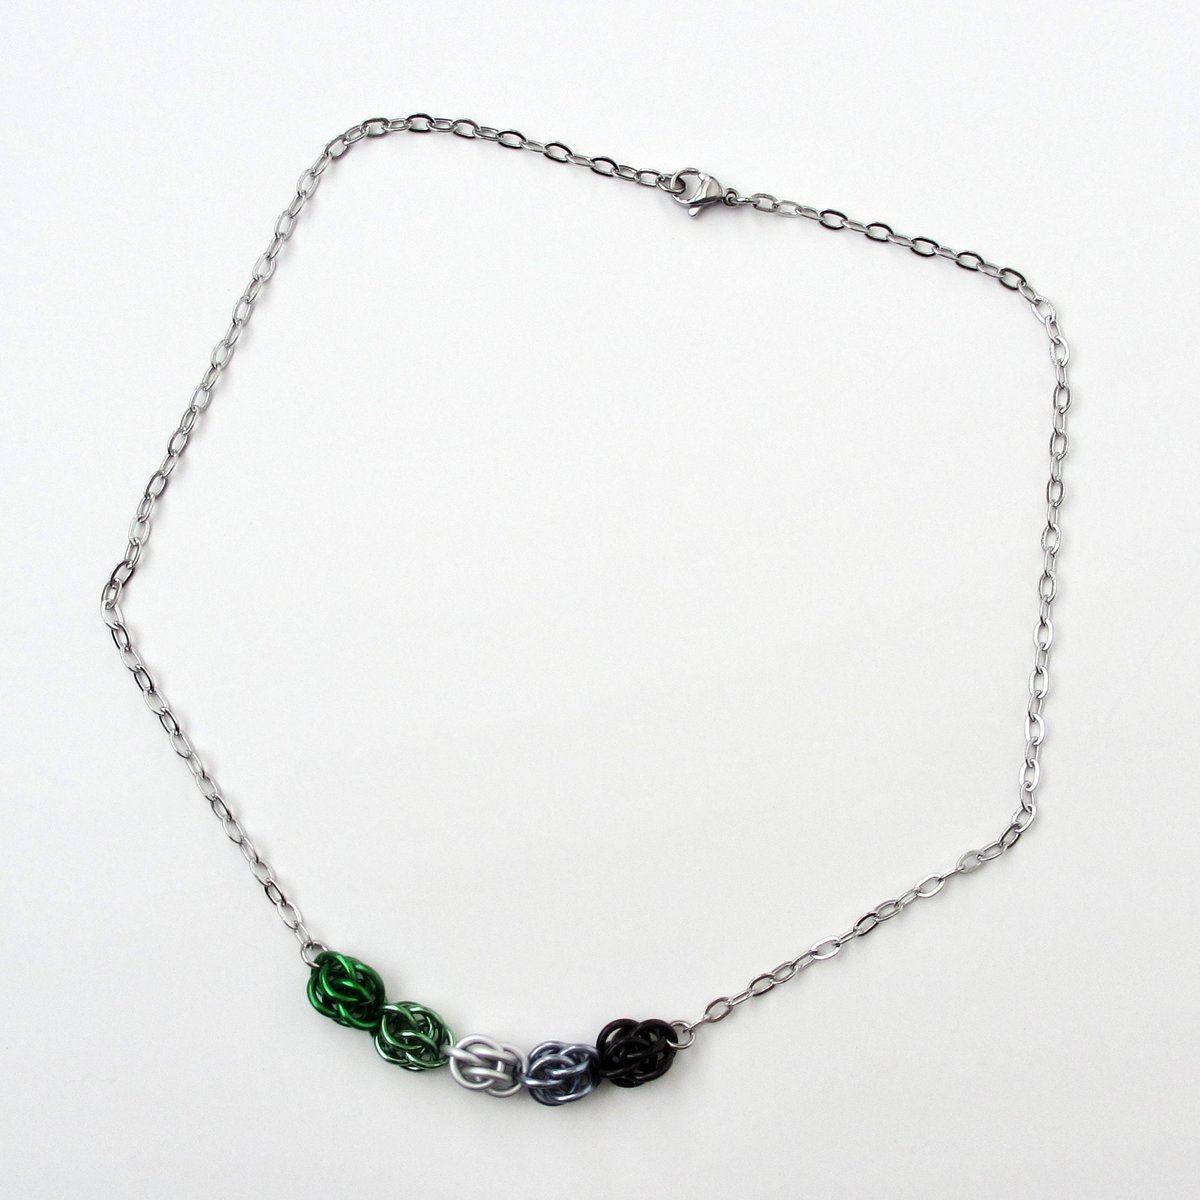 Aromantic pride necklace, chainmail jewelry, Sweetpea weave - green, white, gray, black